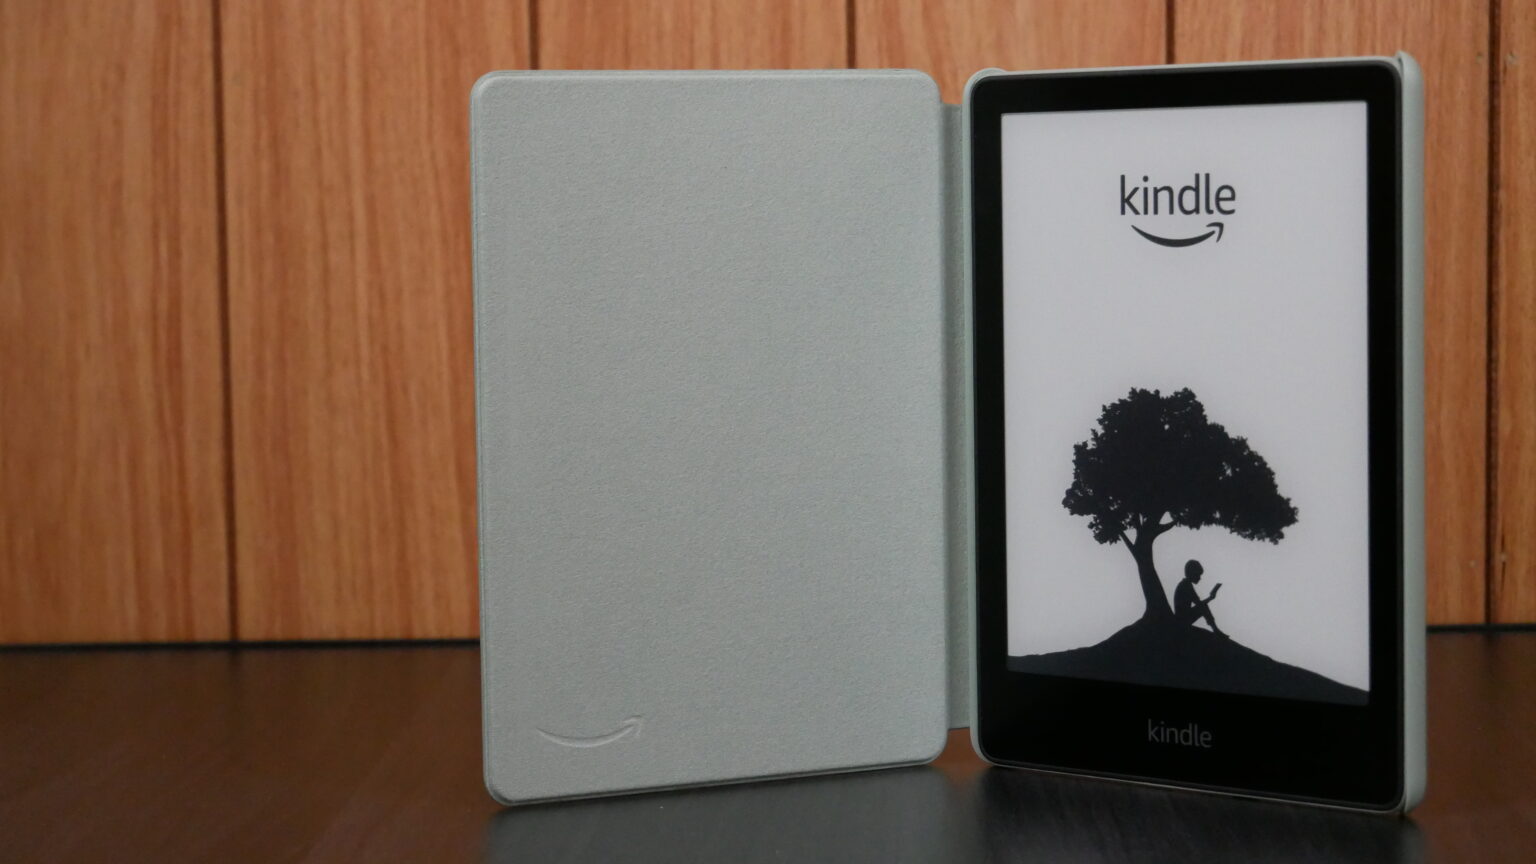 First look at the Amazon Kindle Paperwhite and Case in Agave Green